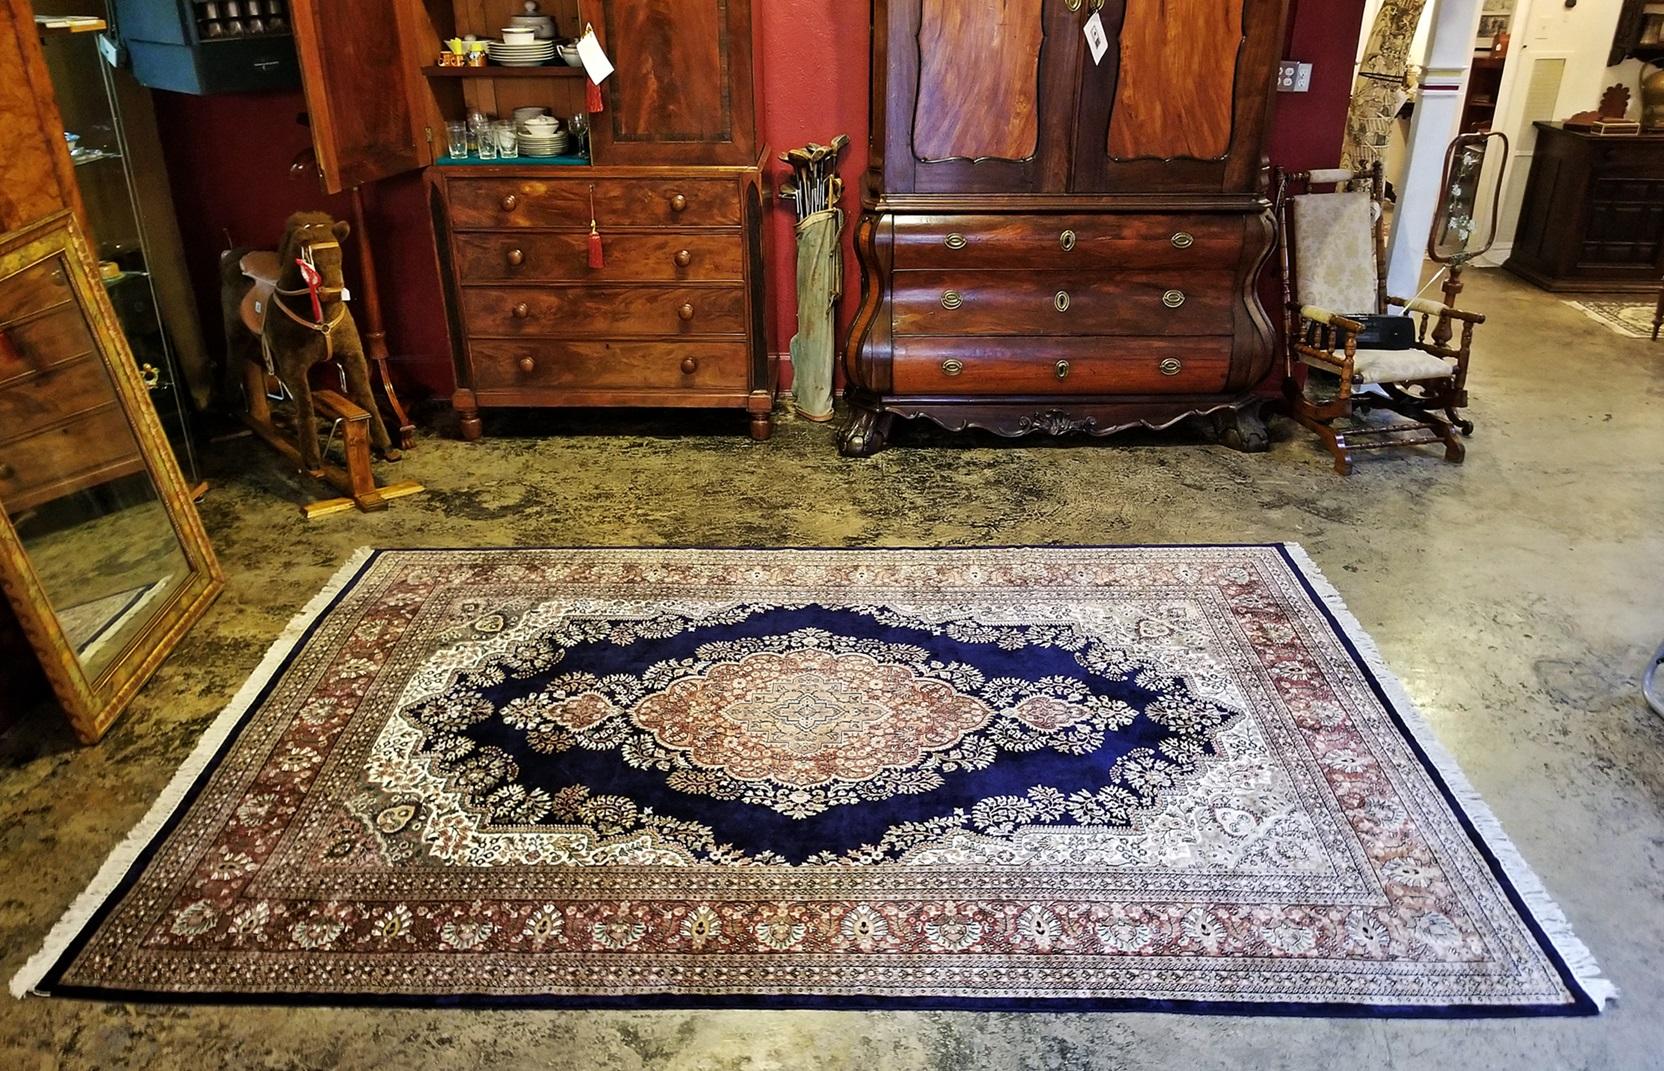 Made in Kashmir, India from really luxurious silk. Large area rug

Sapphire blue with floral motif's in greens, browns, creams etc.

Early 20th century, circa 1930.

Simply stunning and in perfect condition !!

Provenance: Bought in Ireland